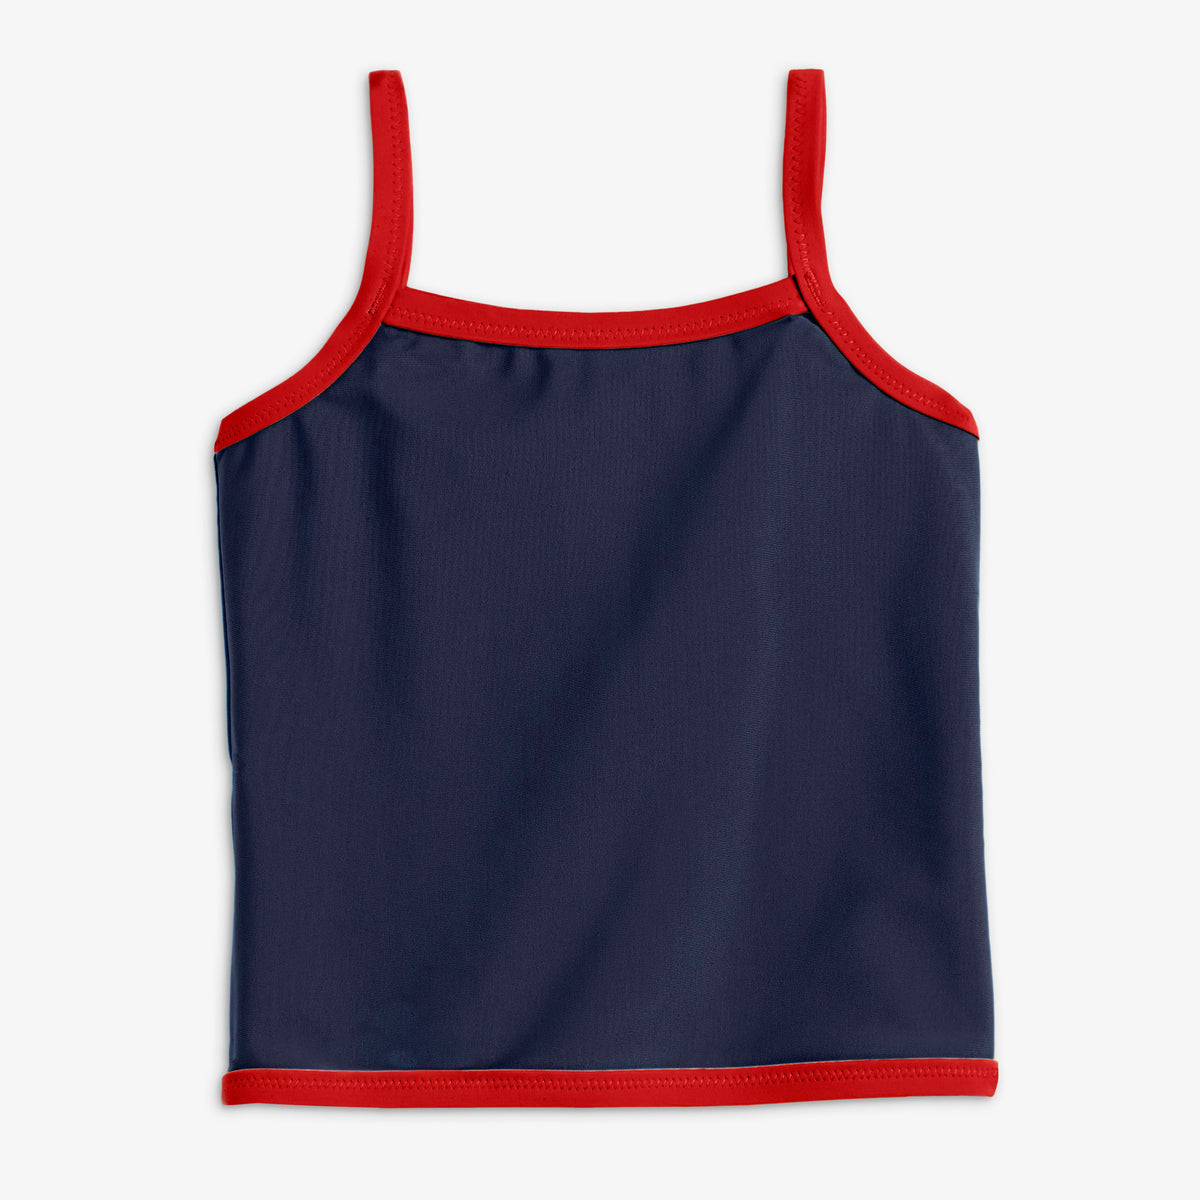 Clearance baby reversible swim top